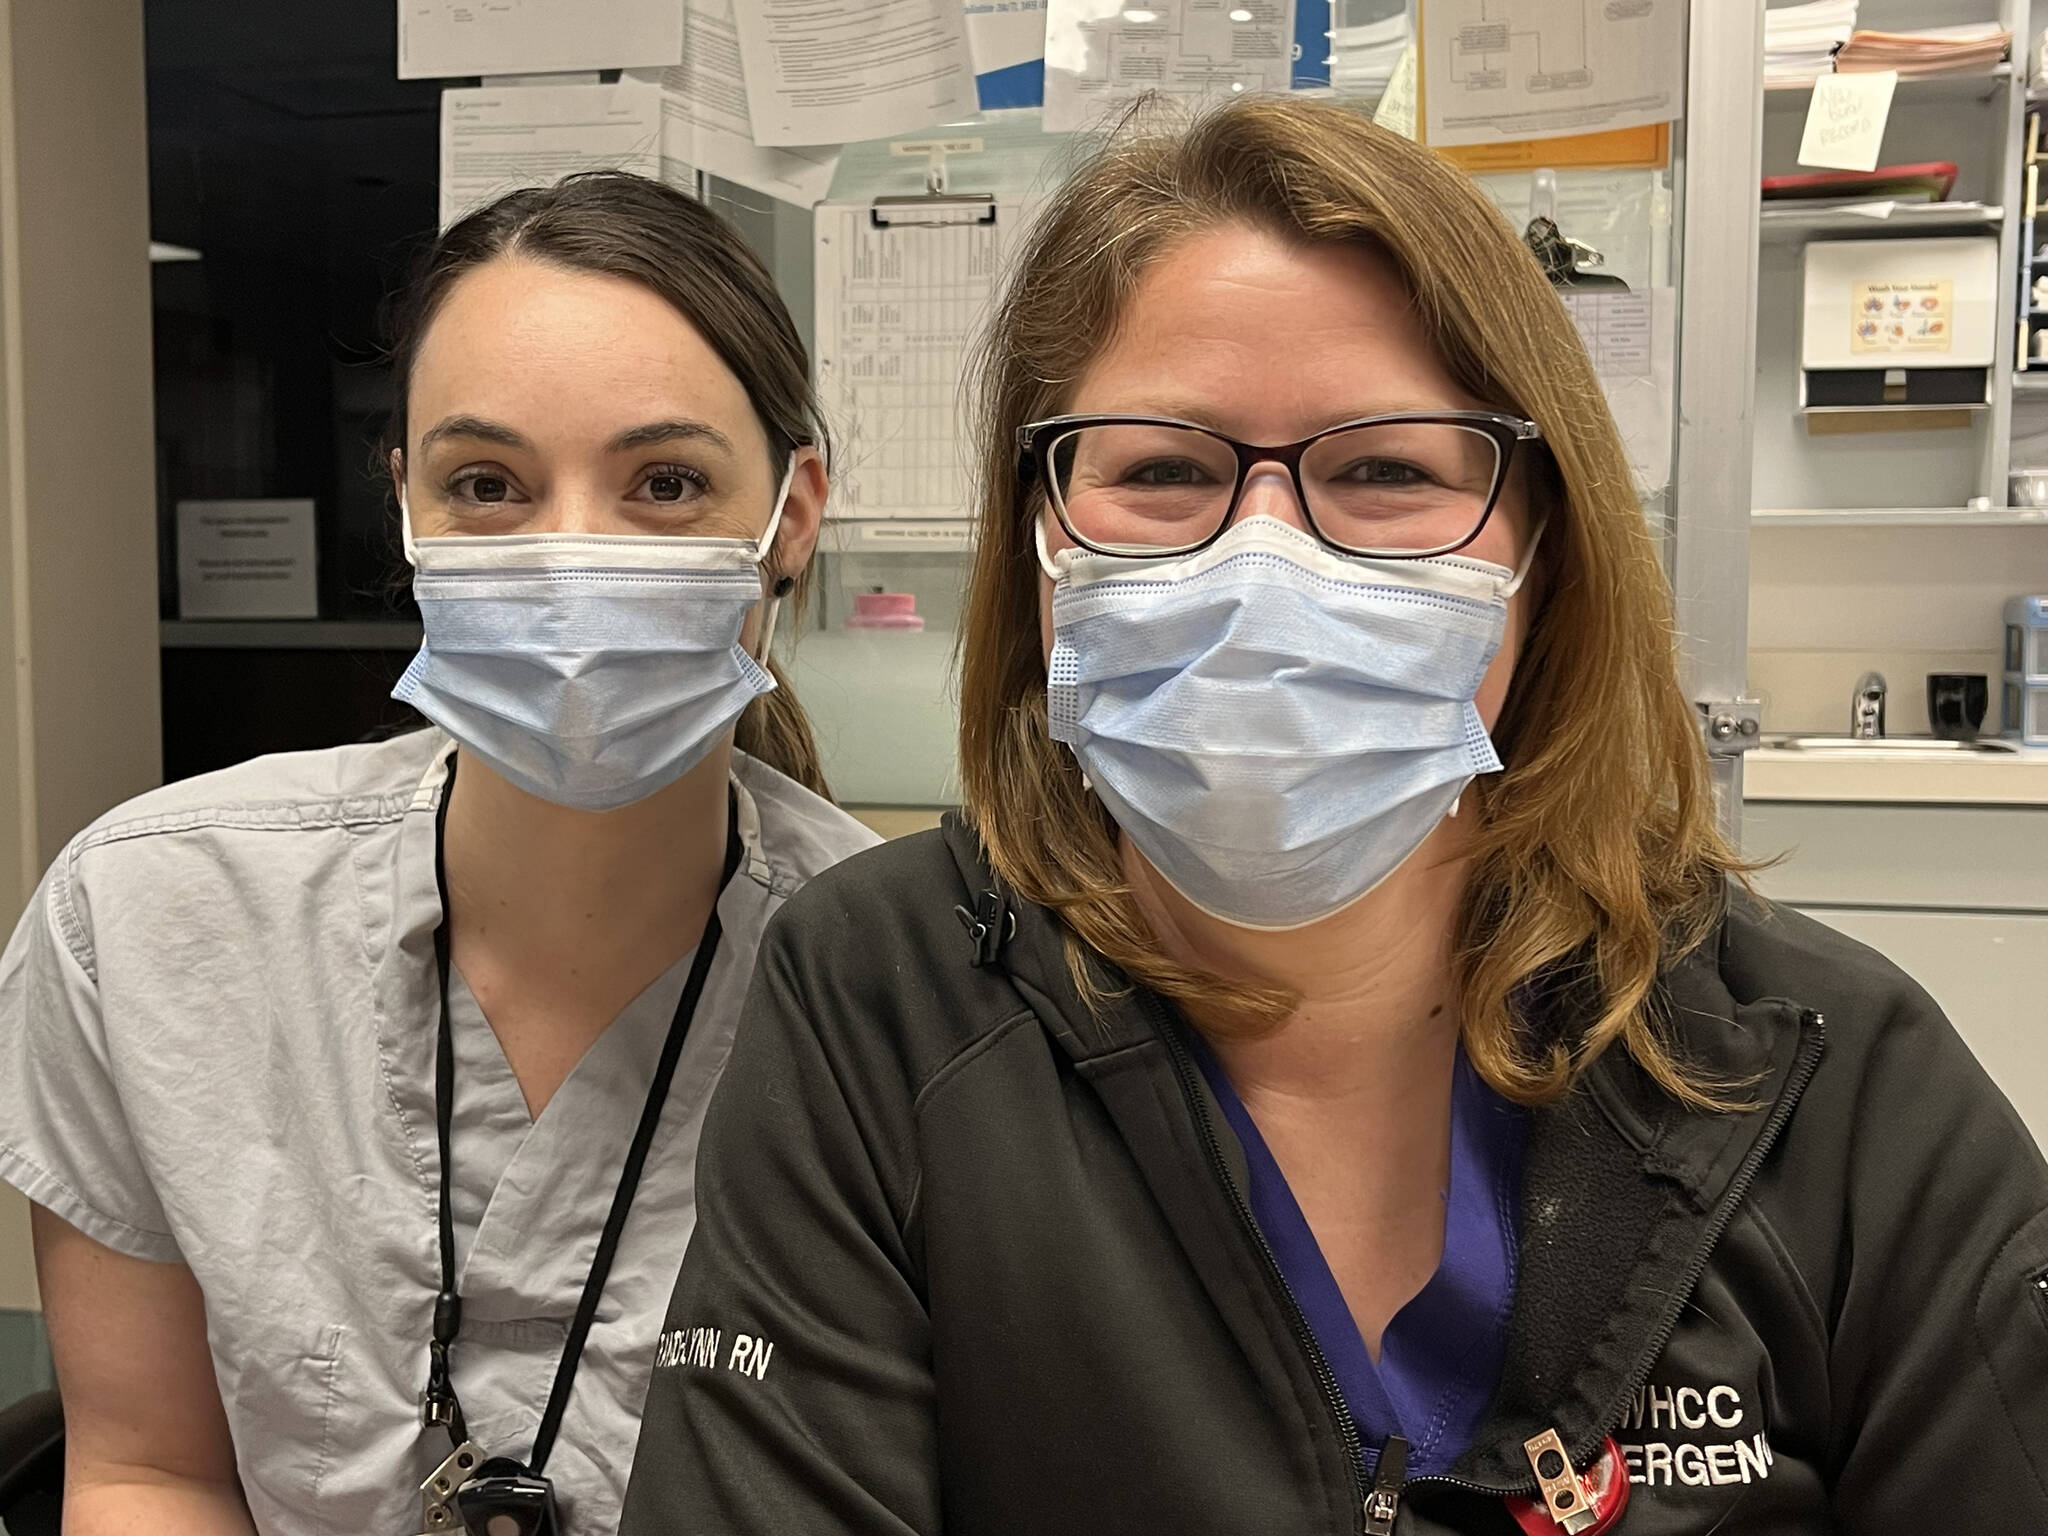 Two local Creston nurses. (Submitted)